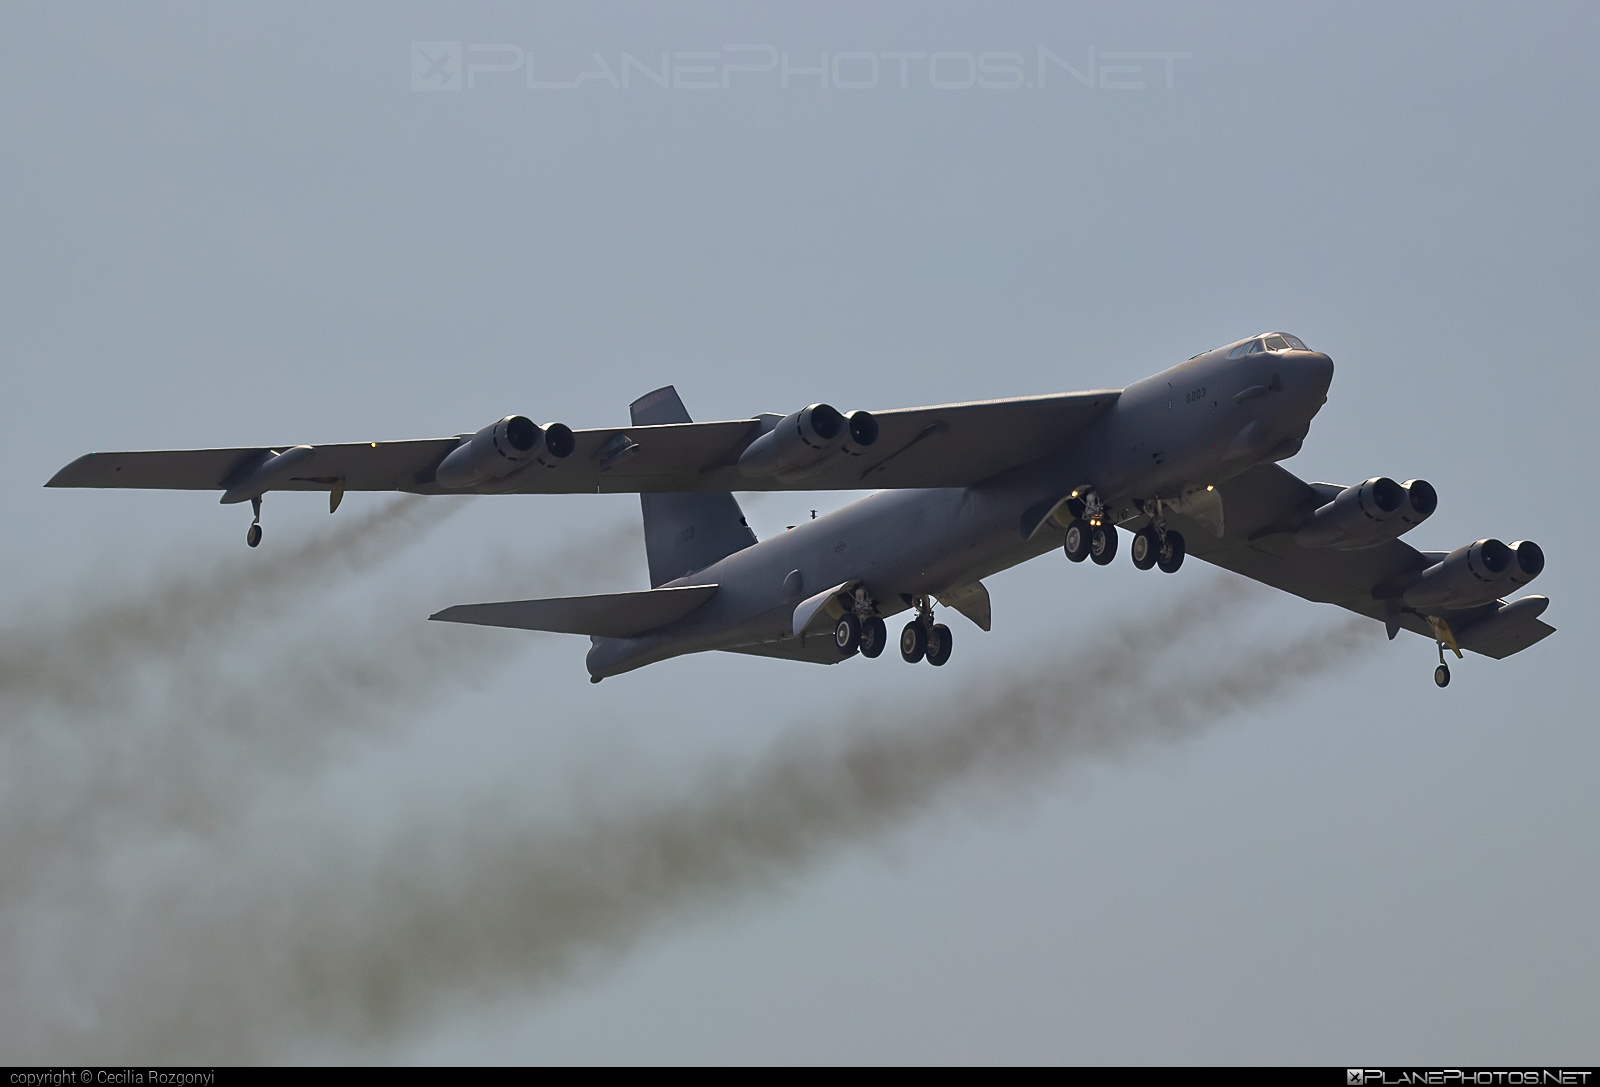 Boeing B-52H Stratofortress - 60-0003 operated by US Air Force (USAF) #b52 #boeing #stratofortress #usaf #usairforce